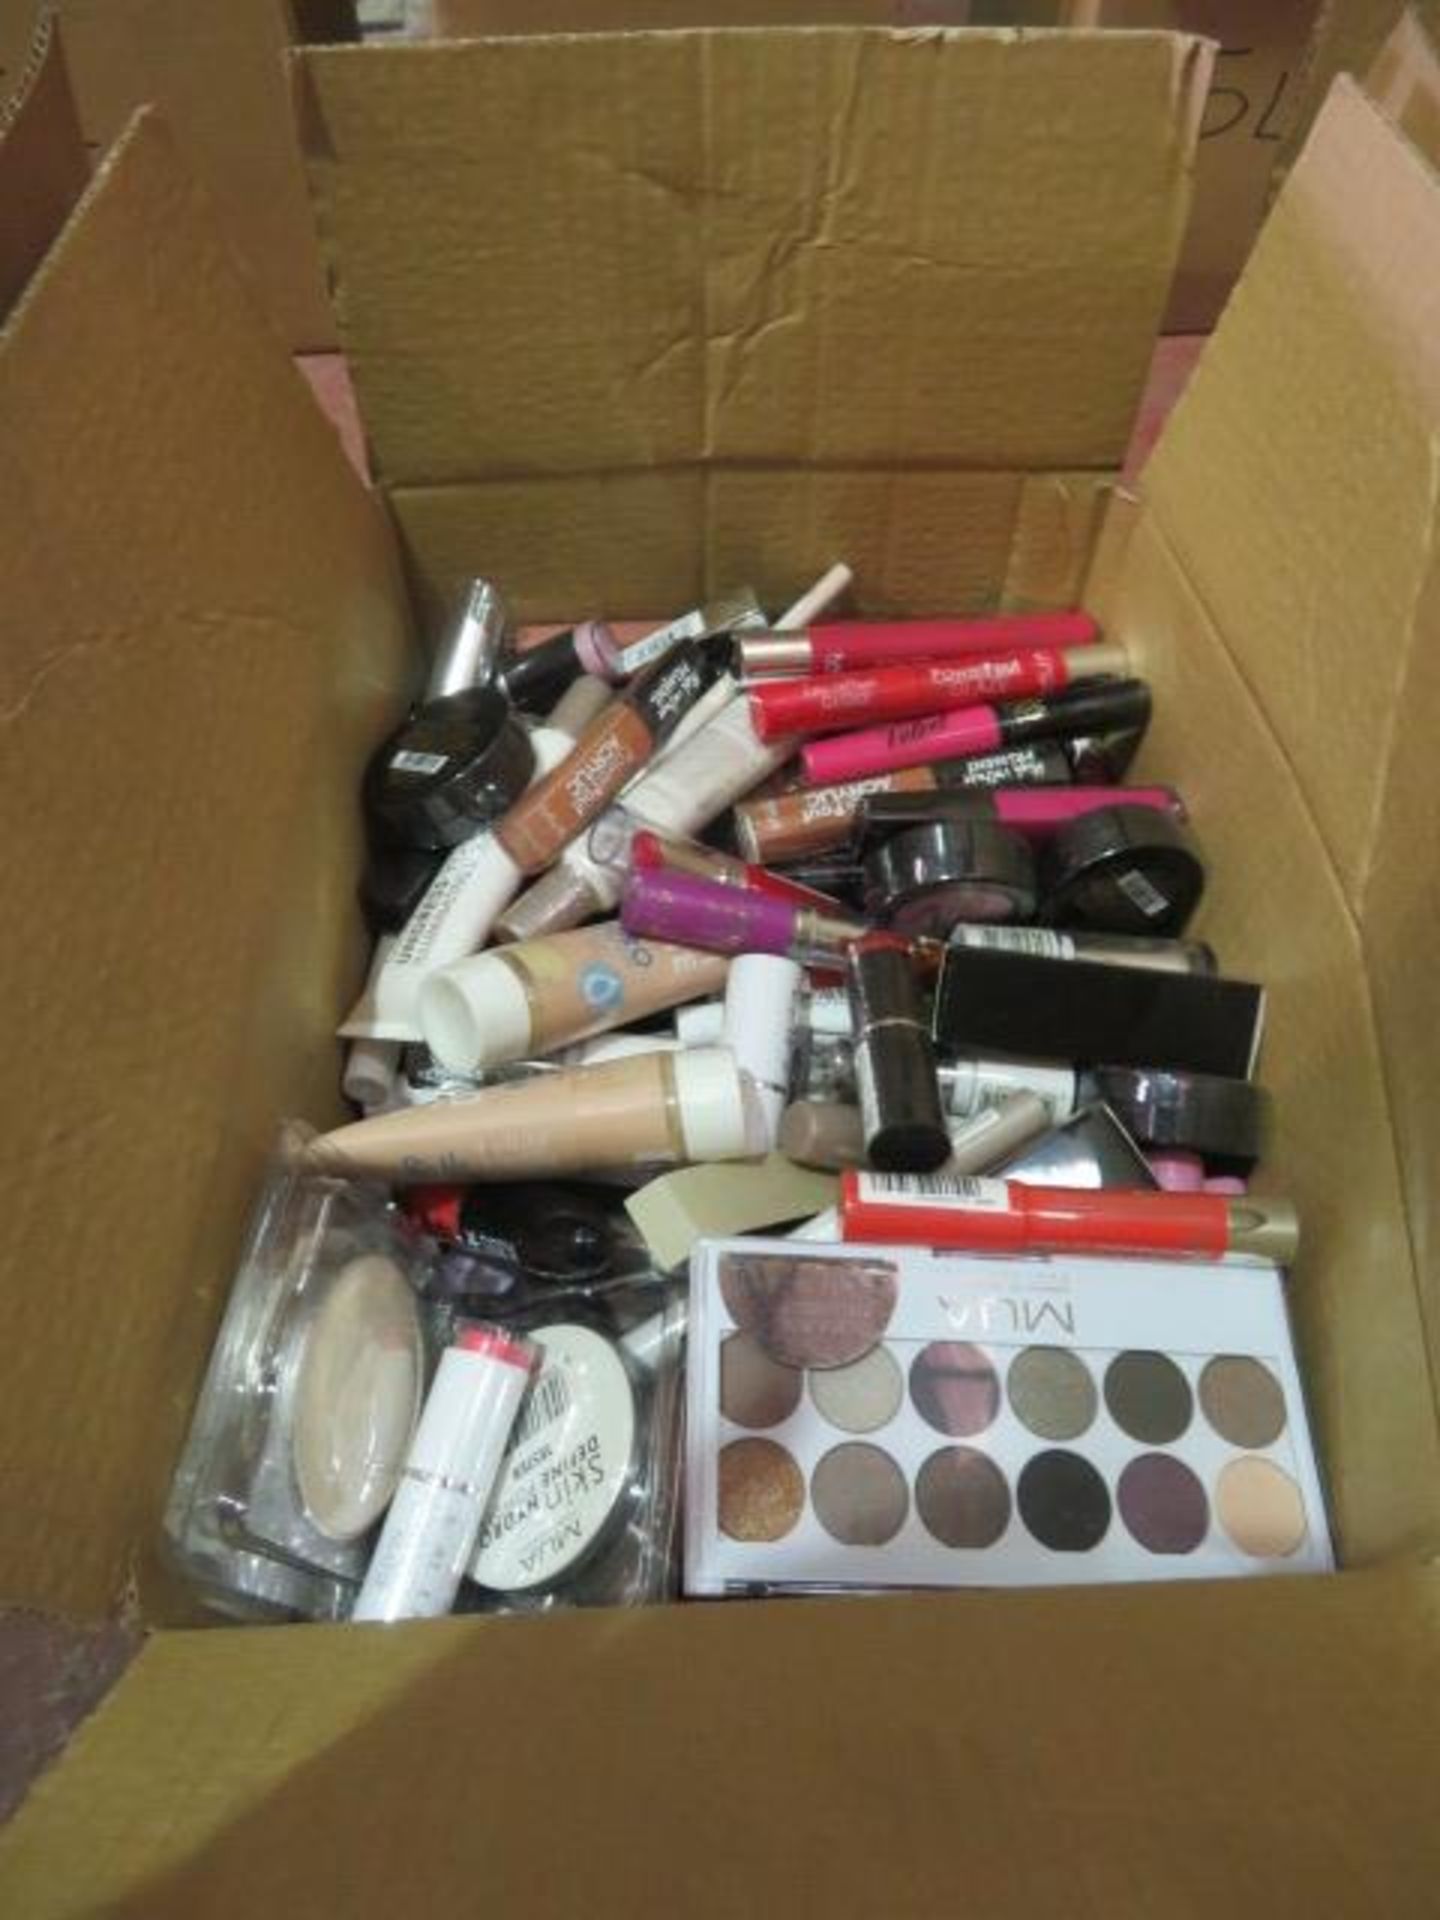 Circa. 200 items of various new make up acadamy make up to include: powerbrow long wear sculpting